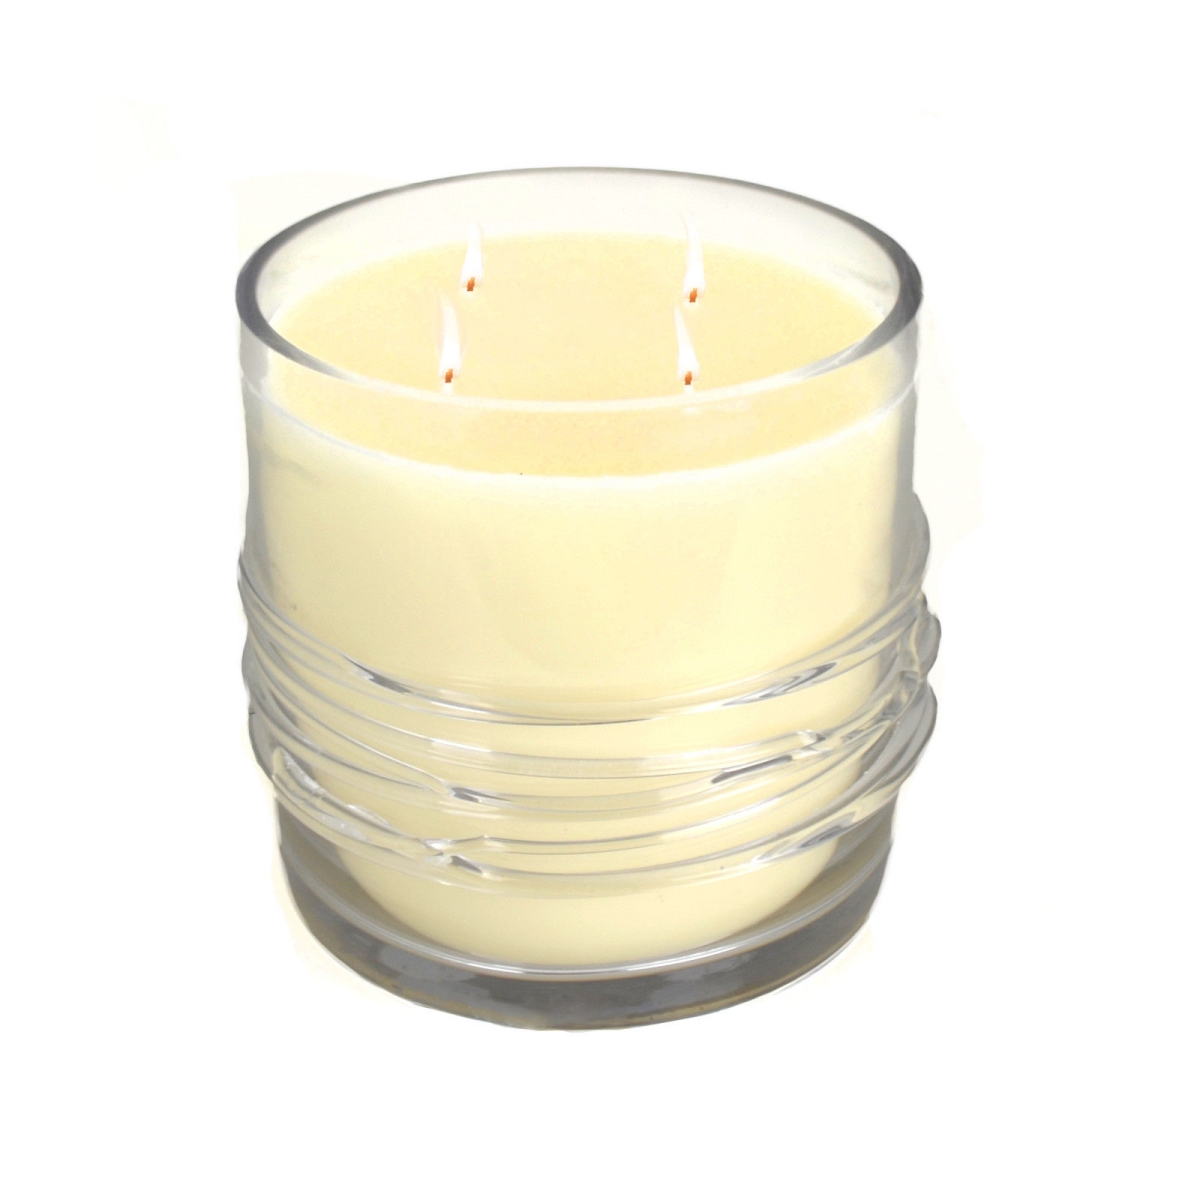 Lcbr Brunei Scented Candle, Clear